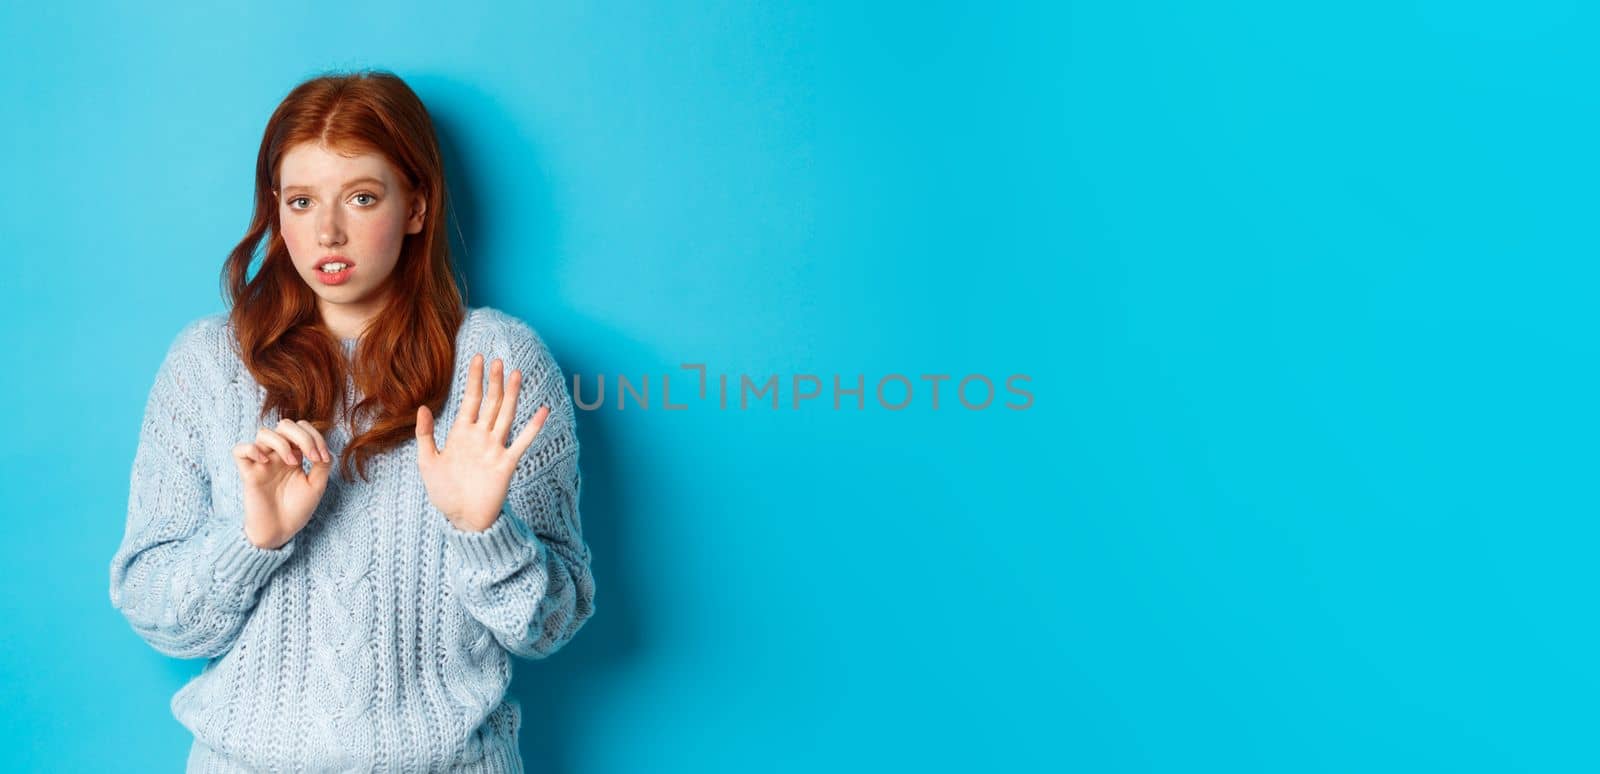 Worried redhead girl refusing or declining an offer, shaking hands and looking anxiously at camera, rejecting something unpleasant, standing over blue background.